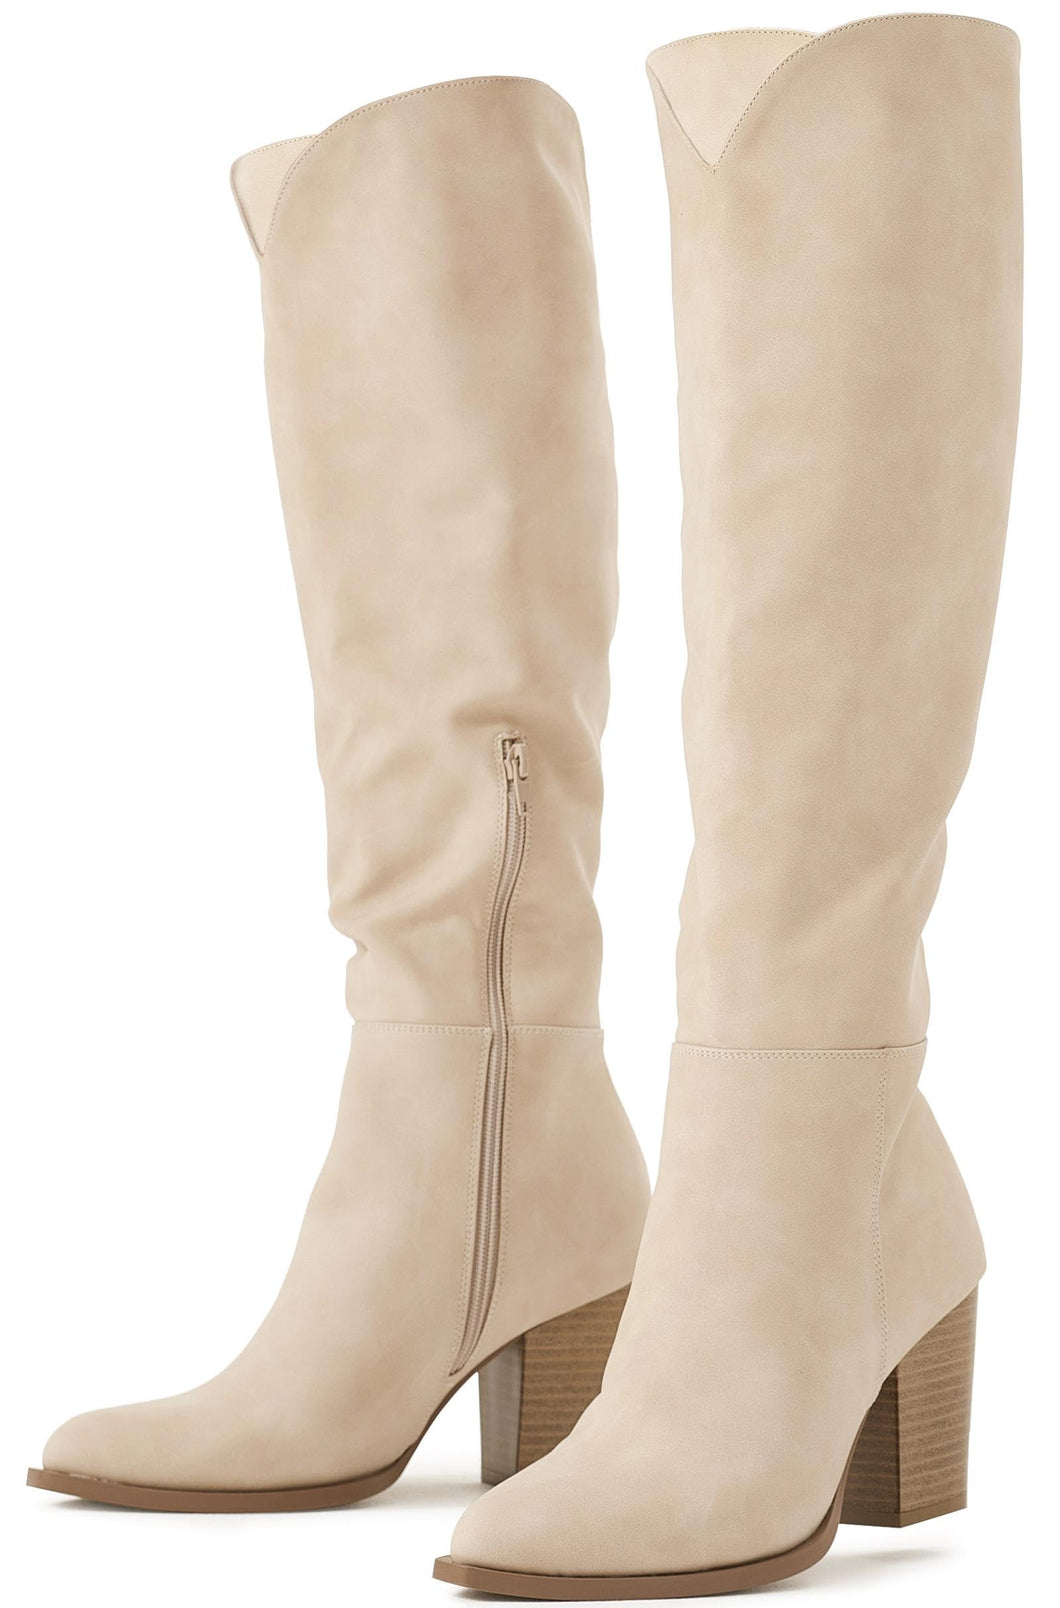 Nude Suede Pointed Toe Knee High Boots